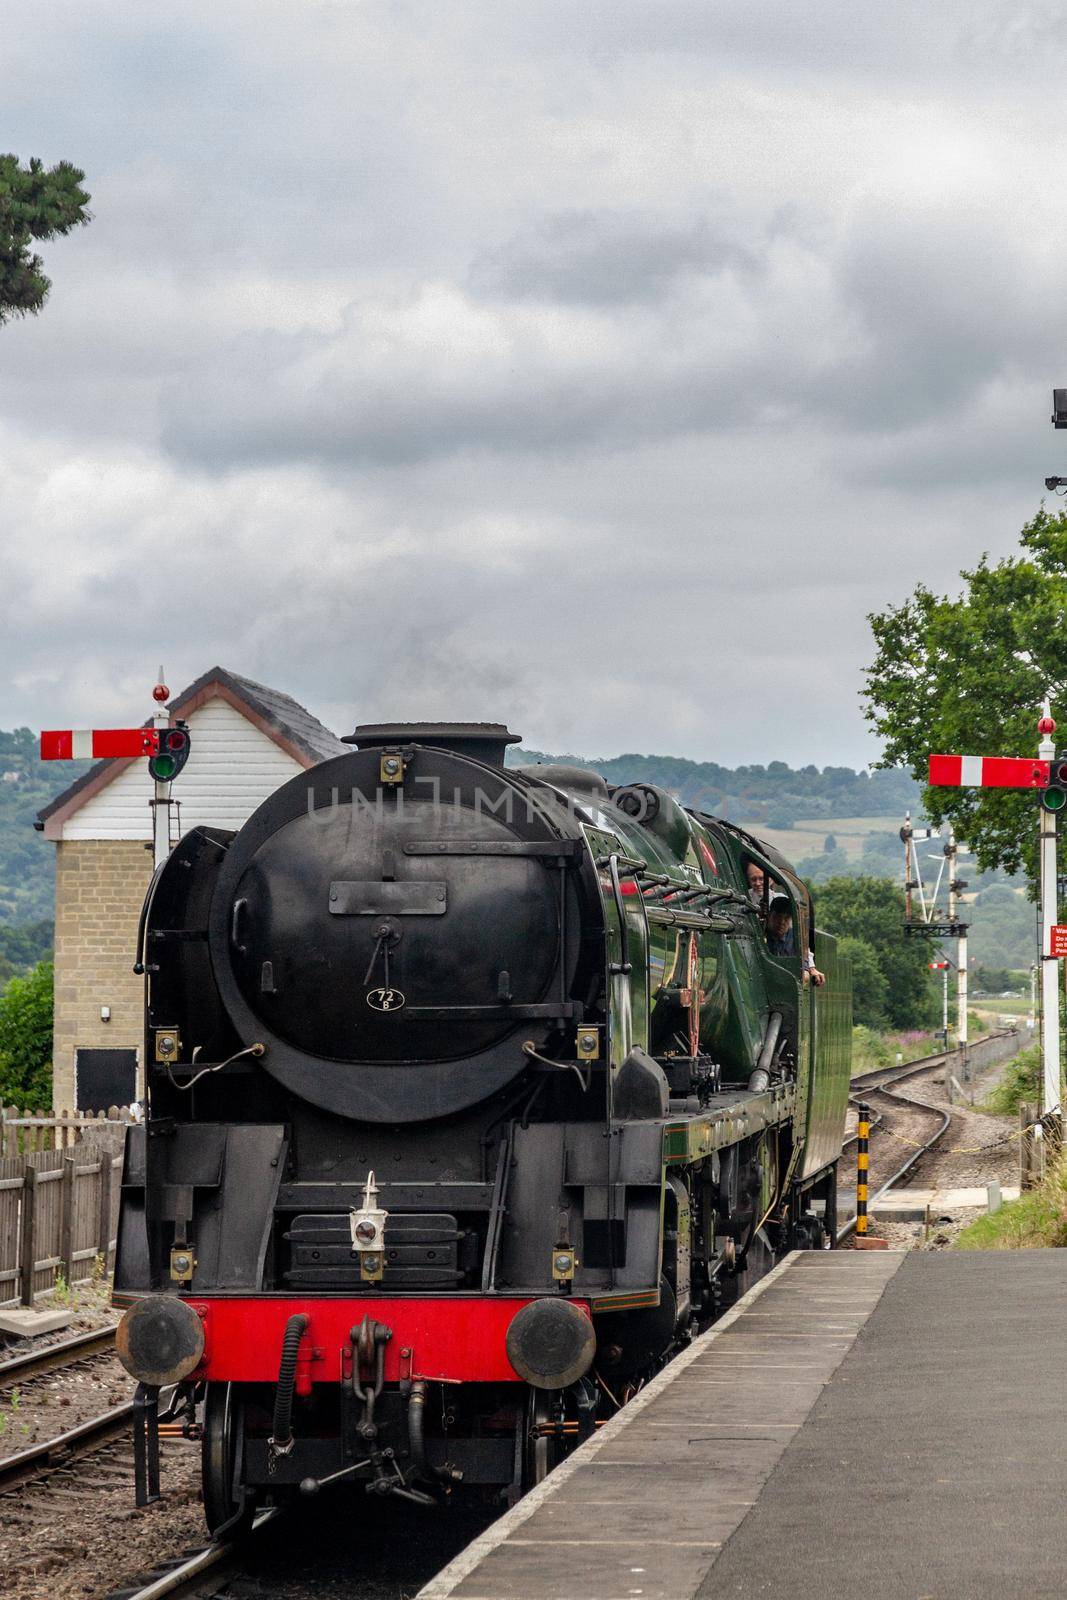 An old iron steam locomotive in a countryside station